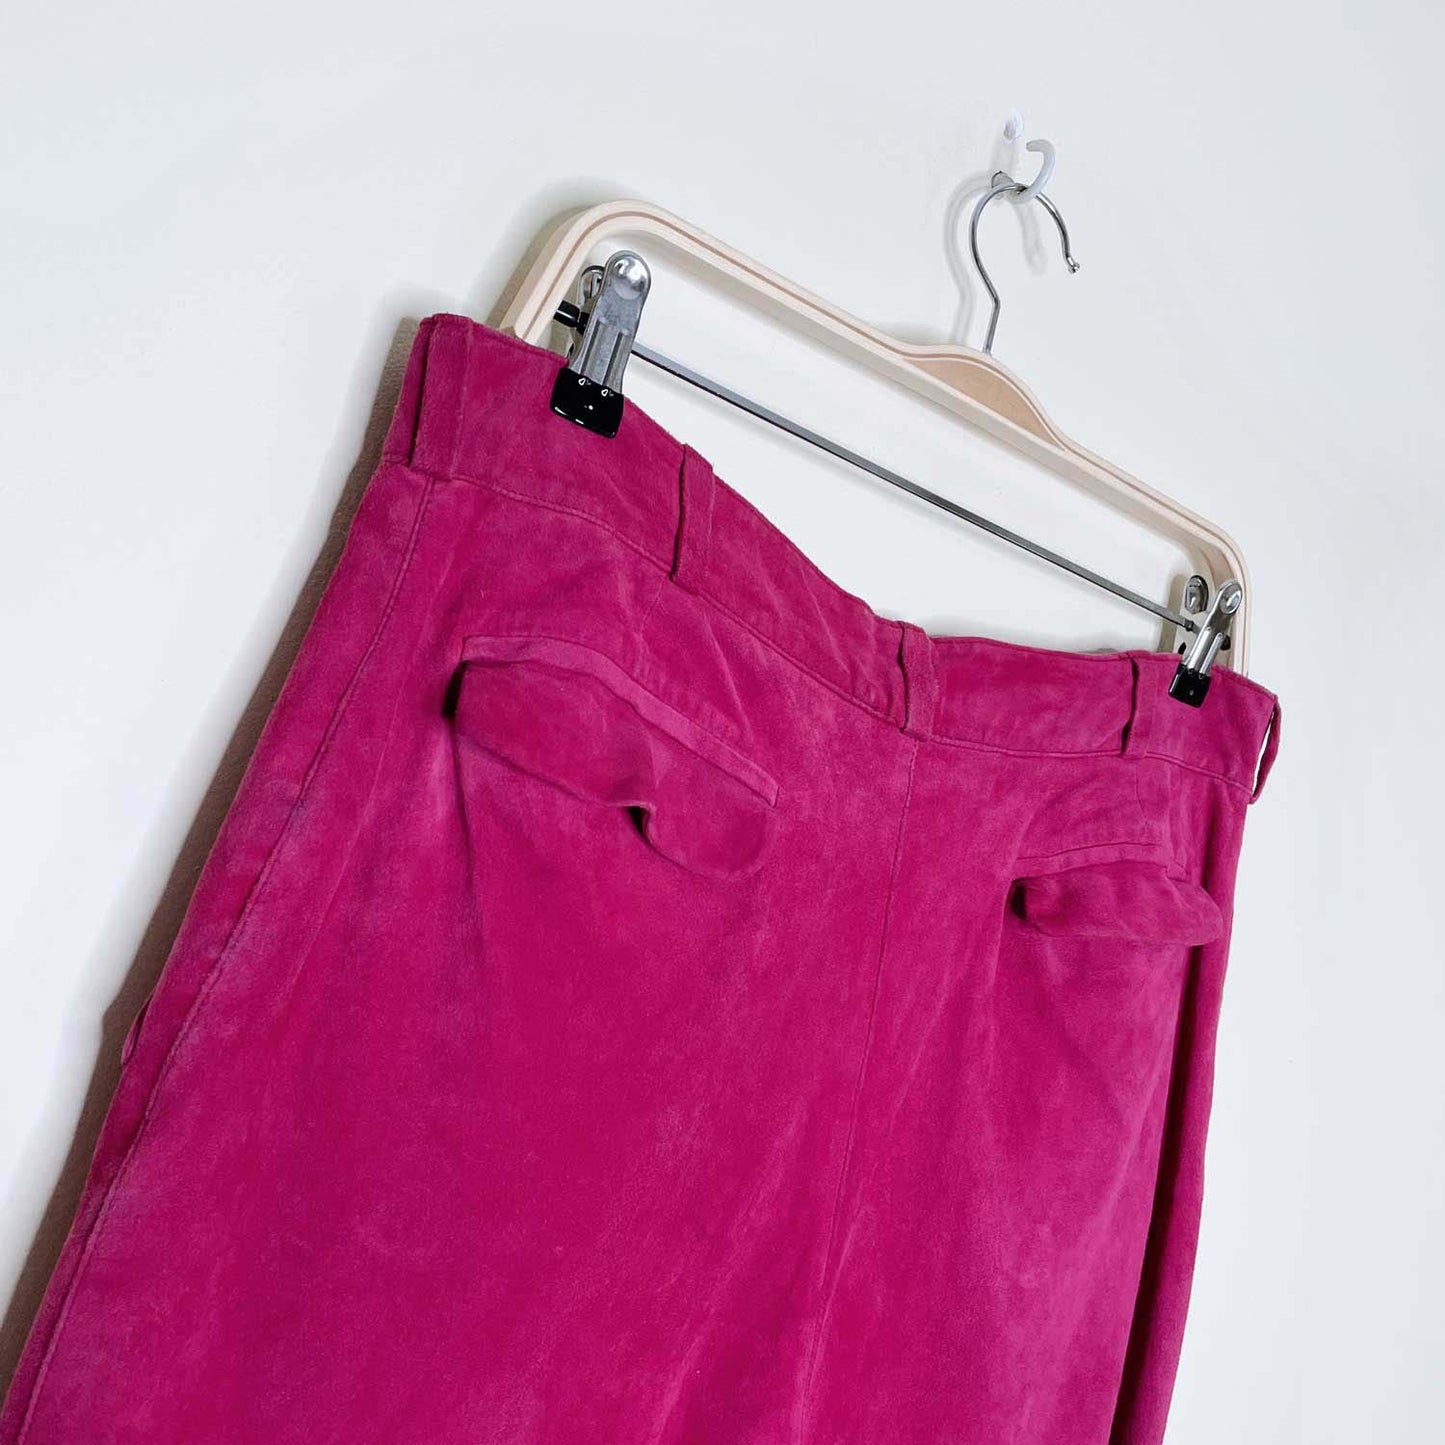 vintage 80s gianni versace pink suede pants - size 34